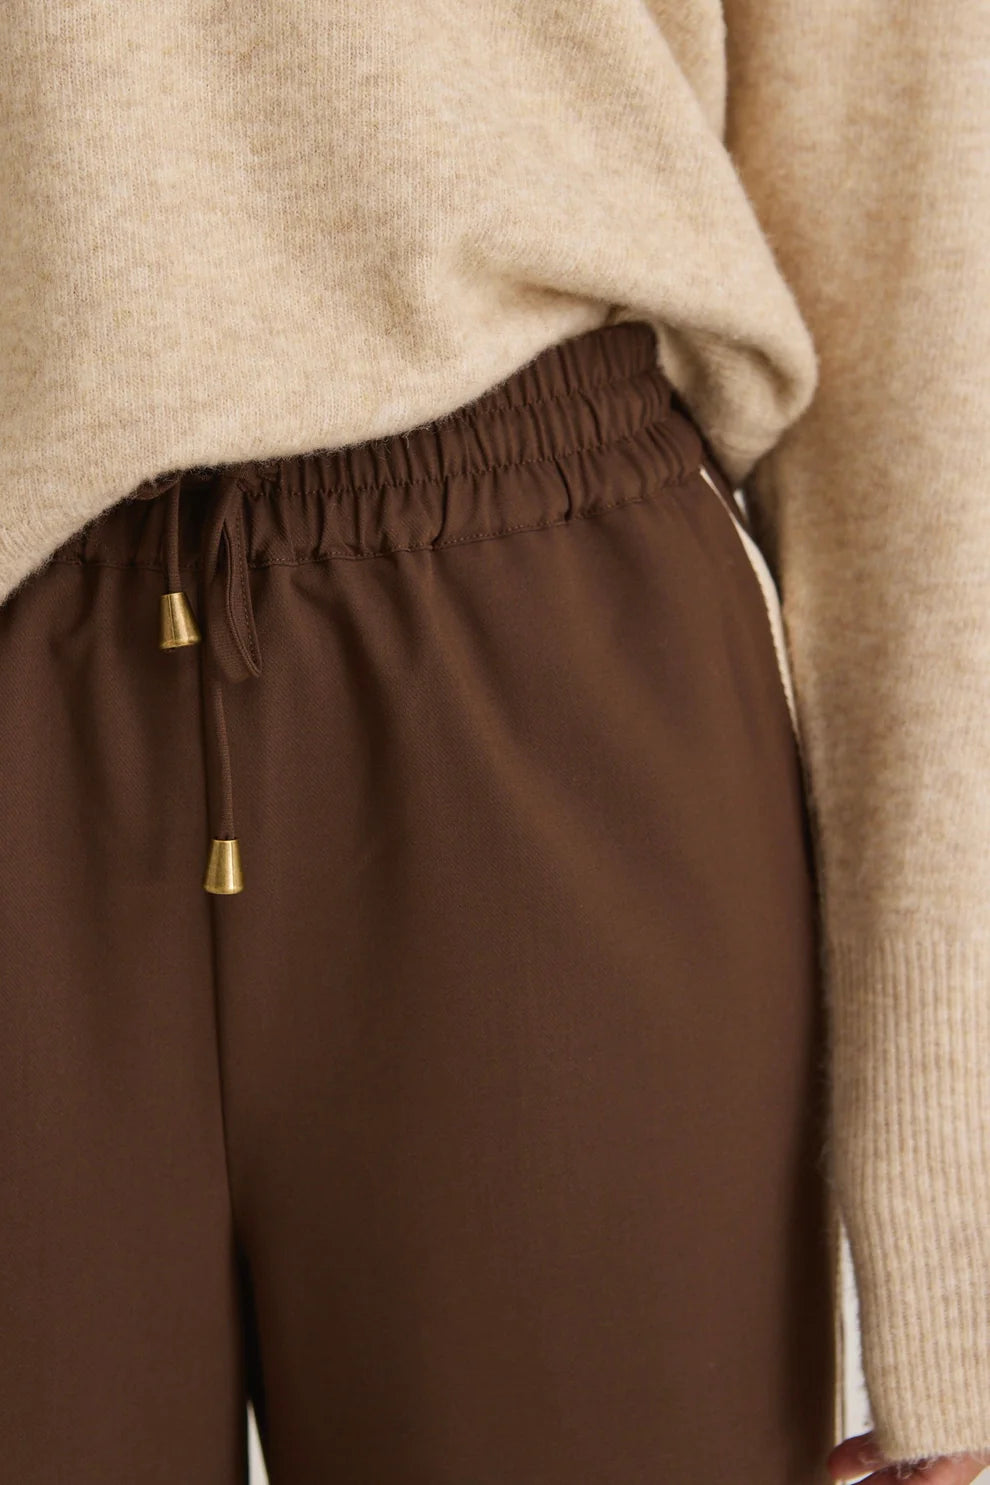 STORIES BE TOLD // Townie Pant CHOCOLATE